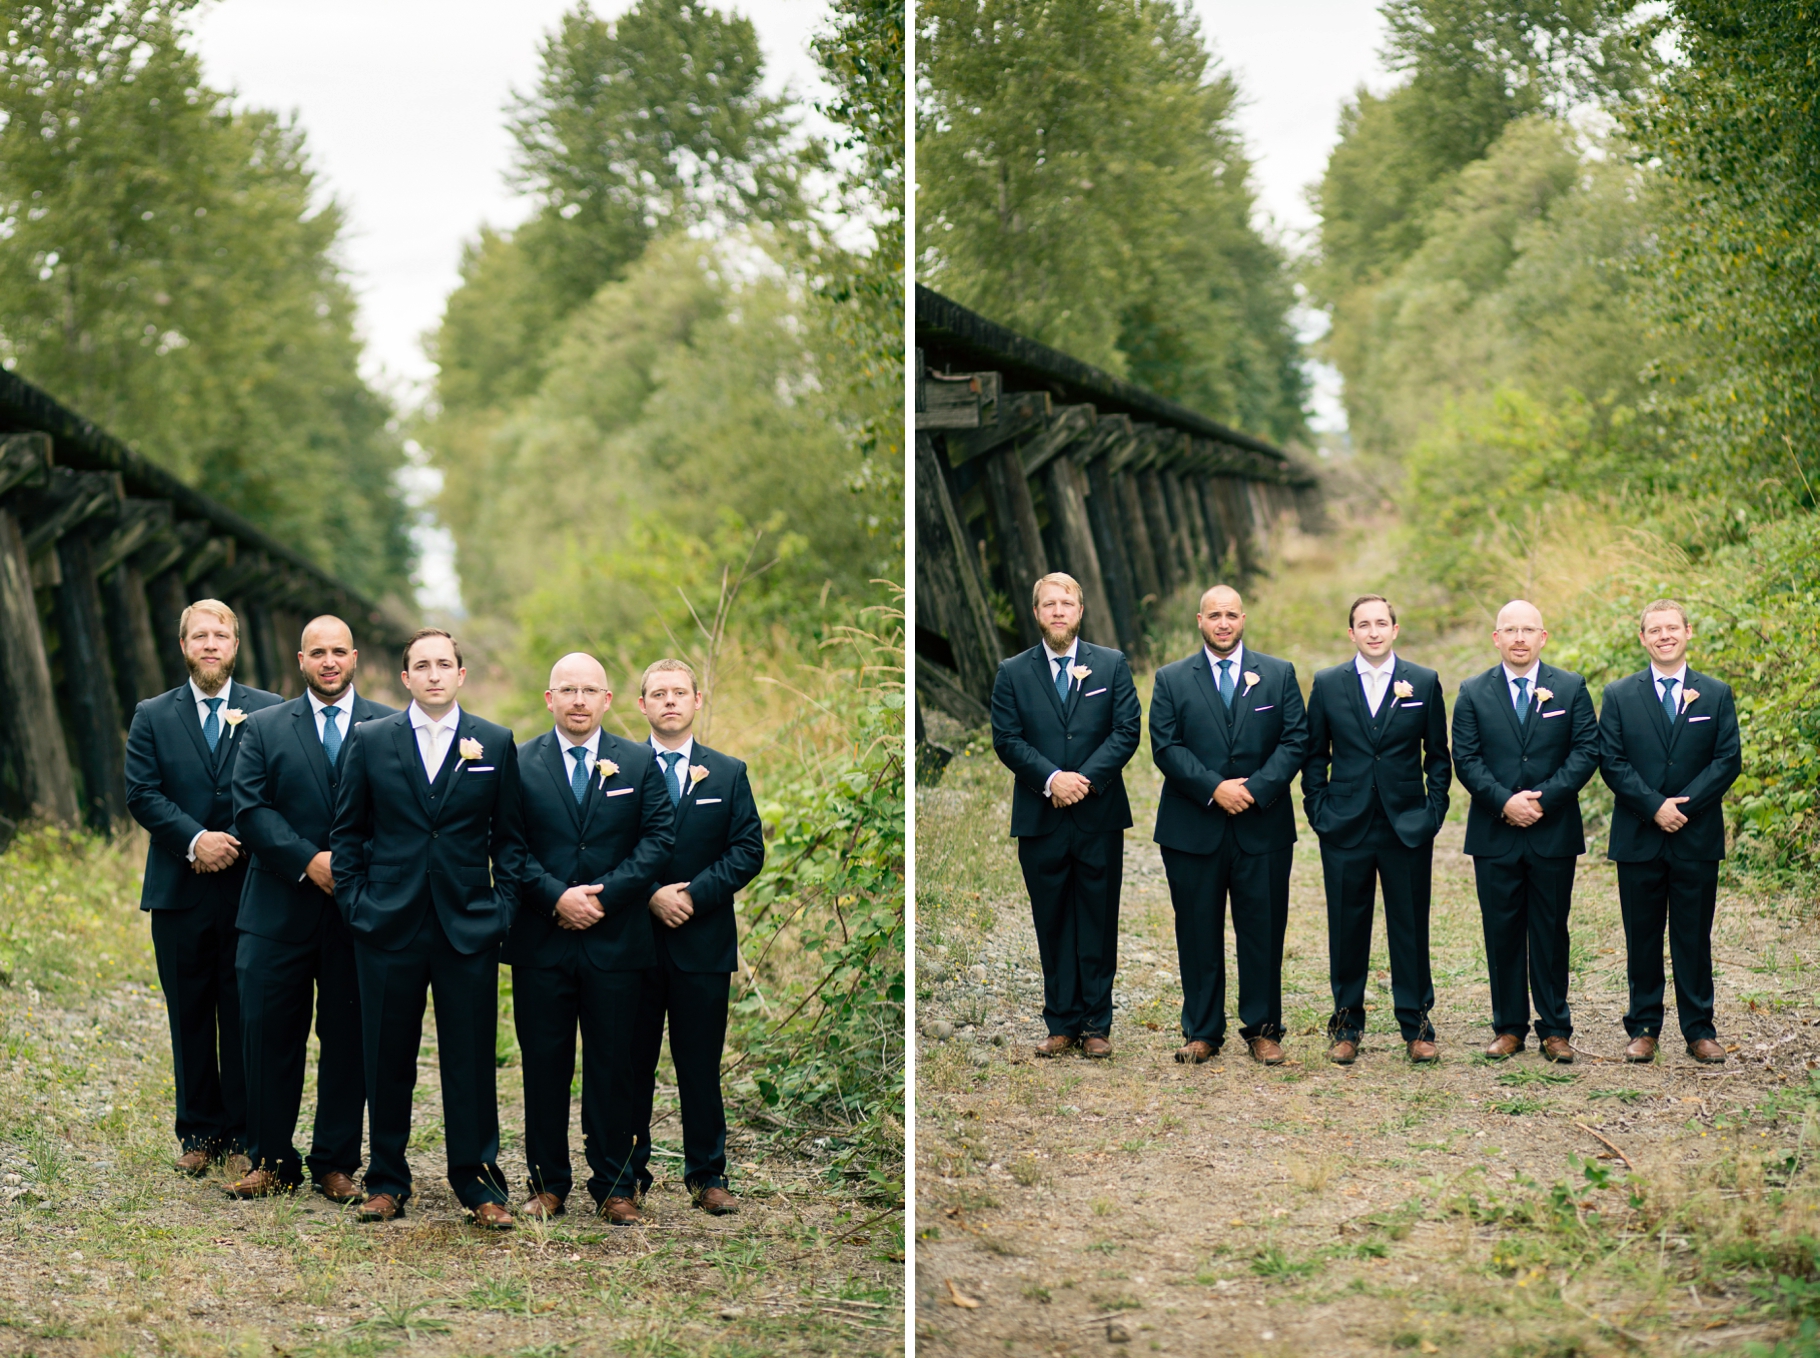 24-Wedding-Party-Portraits-Groom-Navy-Suits-Groomsmen-Hidden-Meadows-Snohomish-Wedding-Photographer-Northwest-Seattle-Photography-by-Betty-Elaine